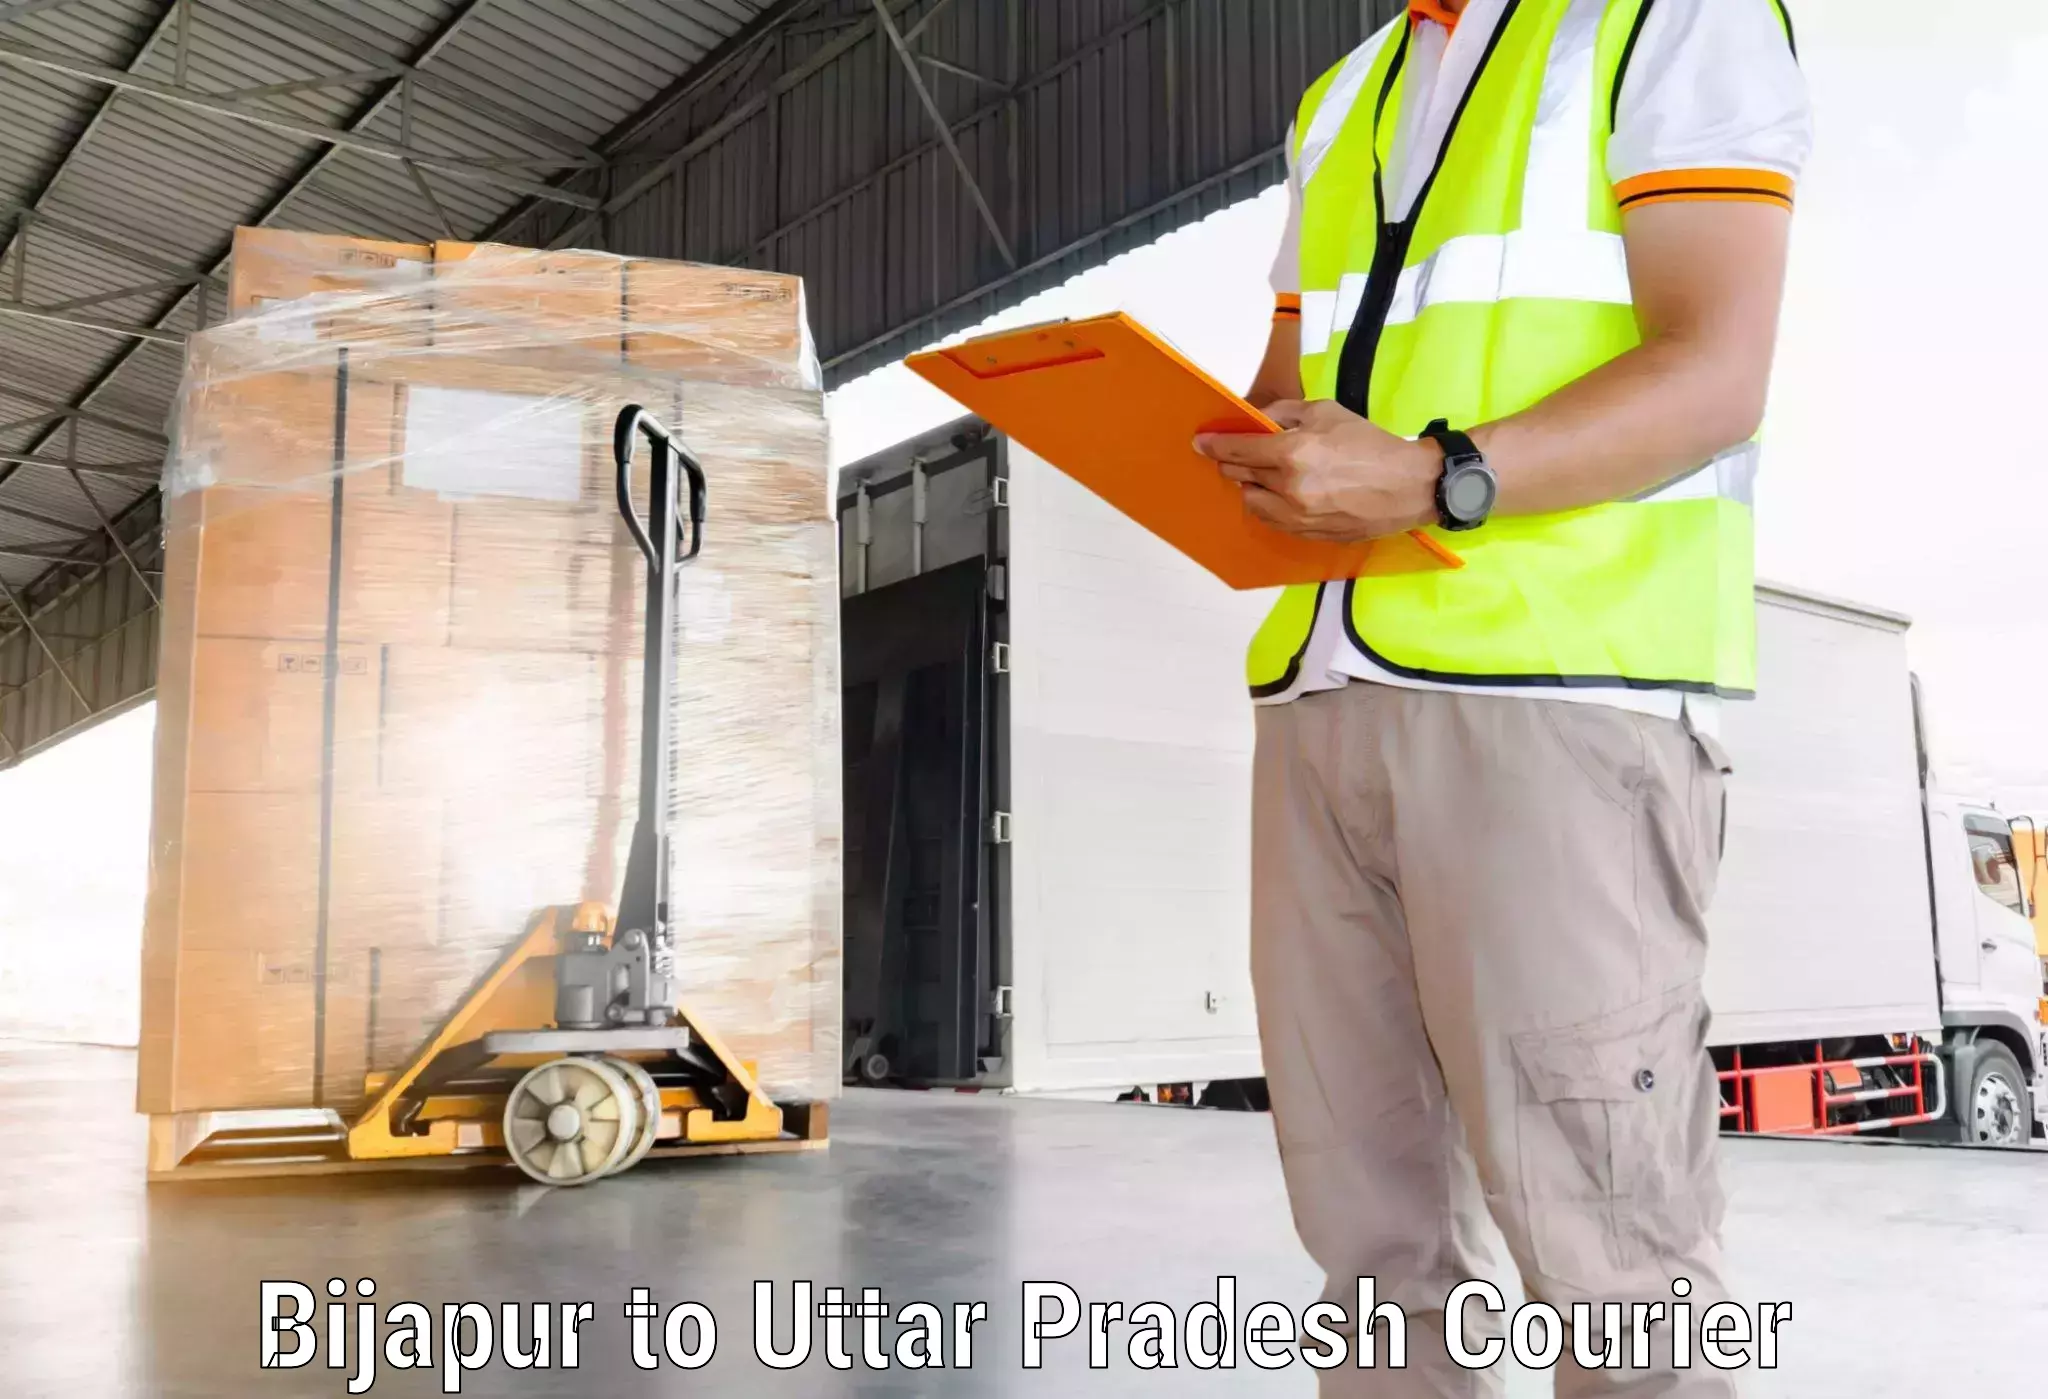 24/7 courier service in Bijapur to Rasulabad